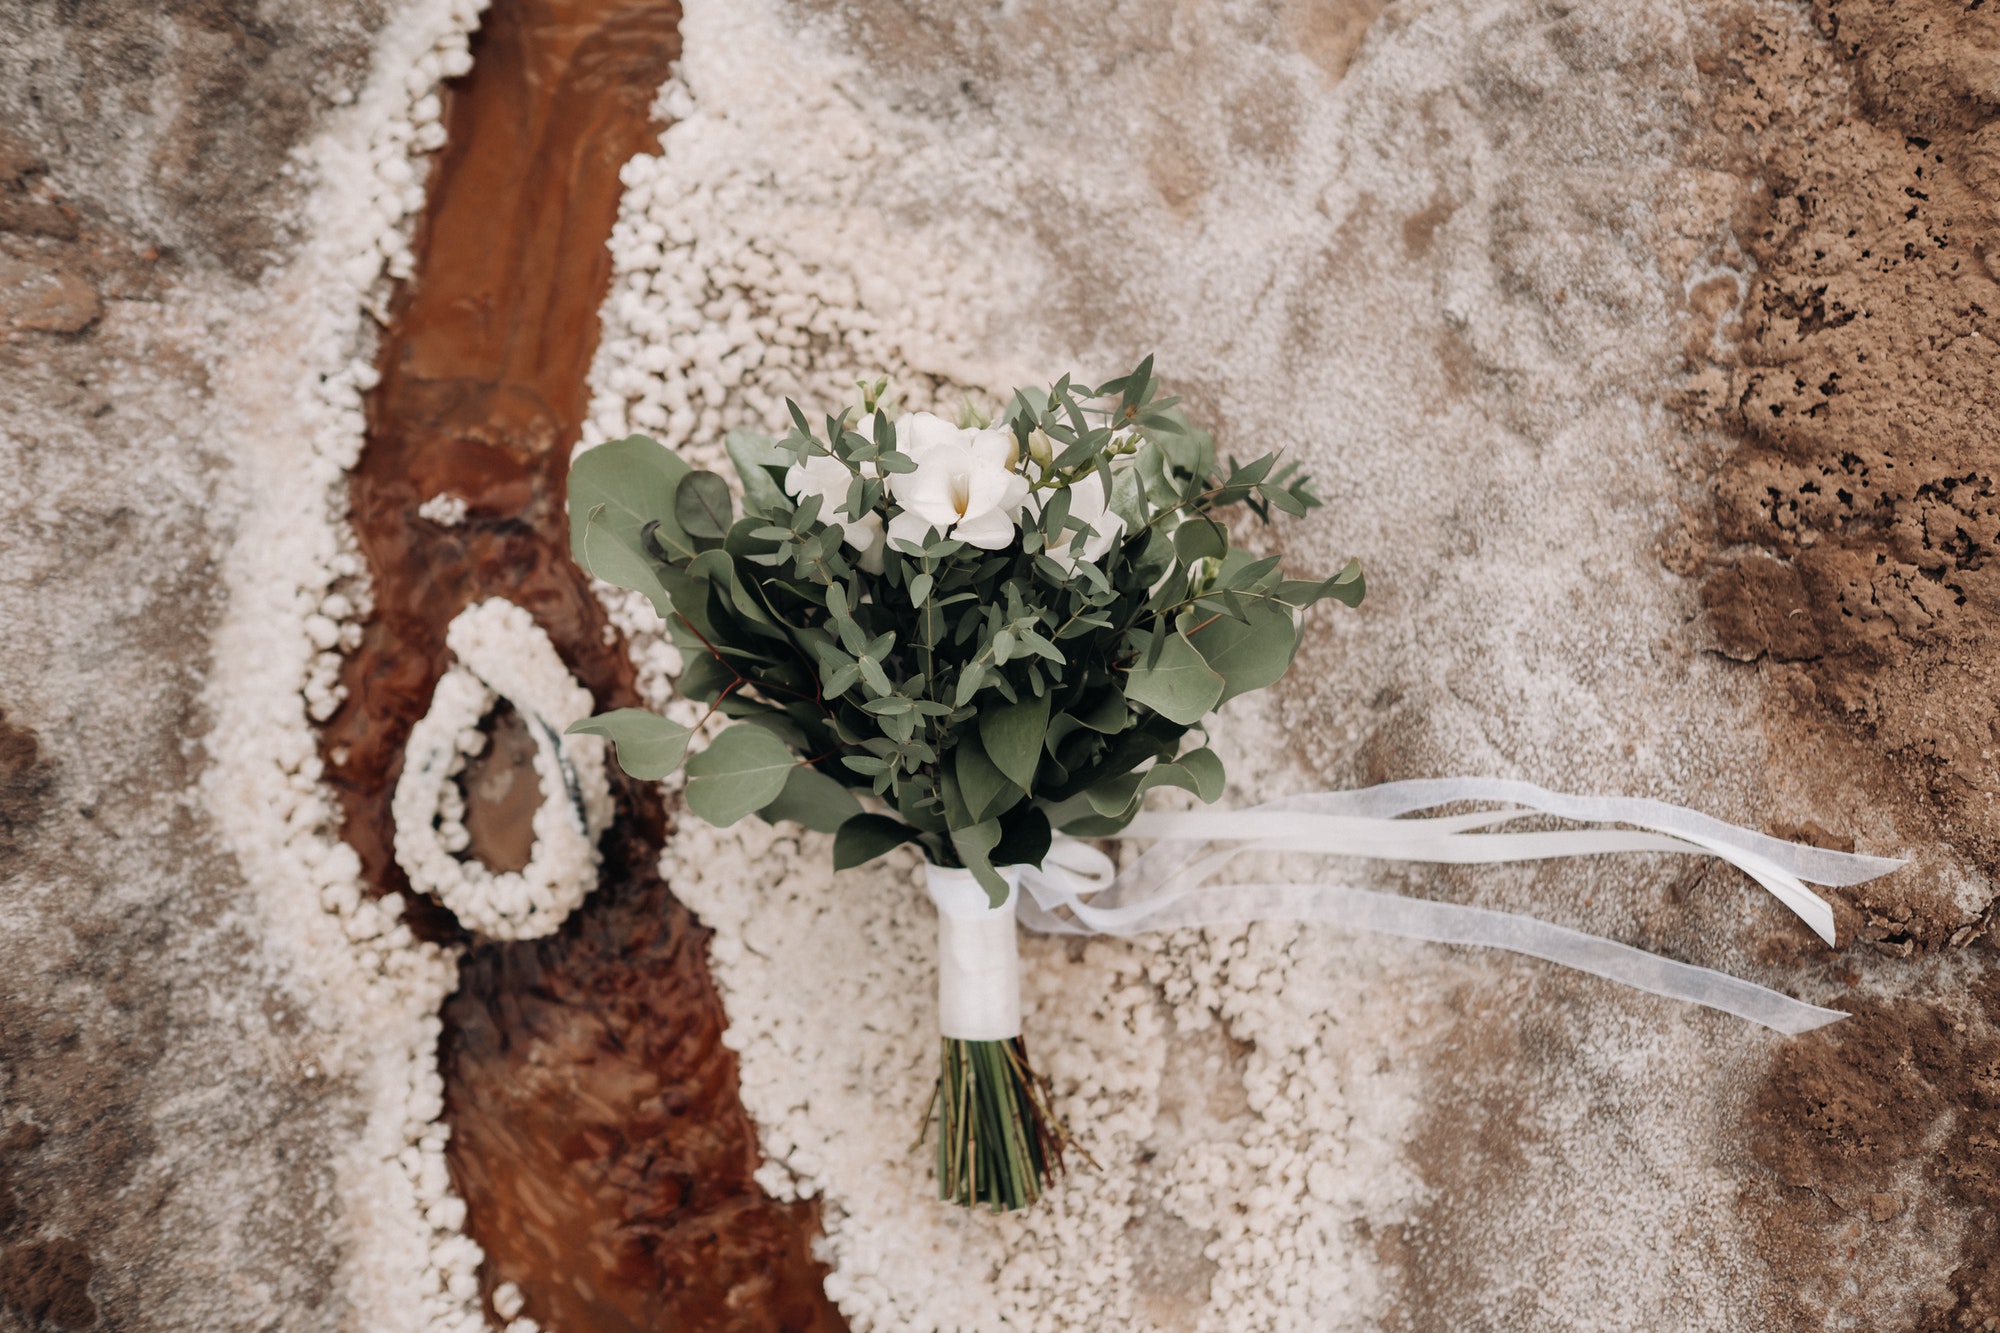 the wedding bouquet rests on a salty texture.The decor at the wedding